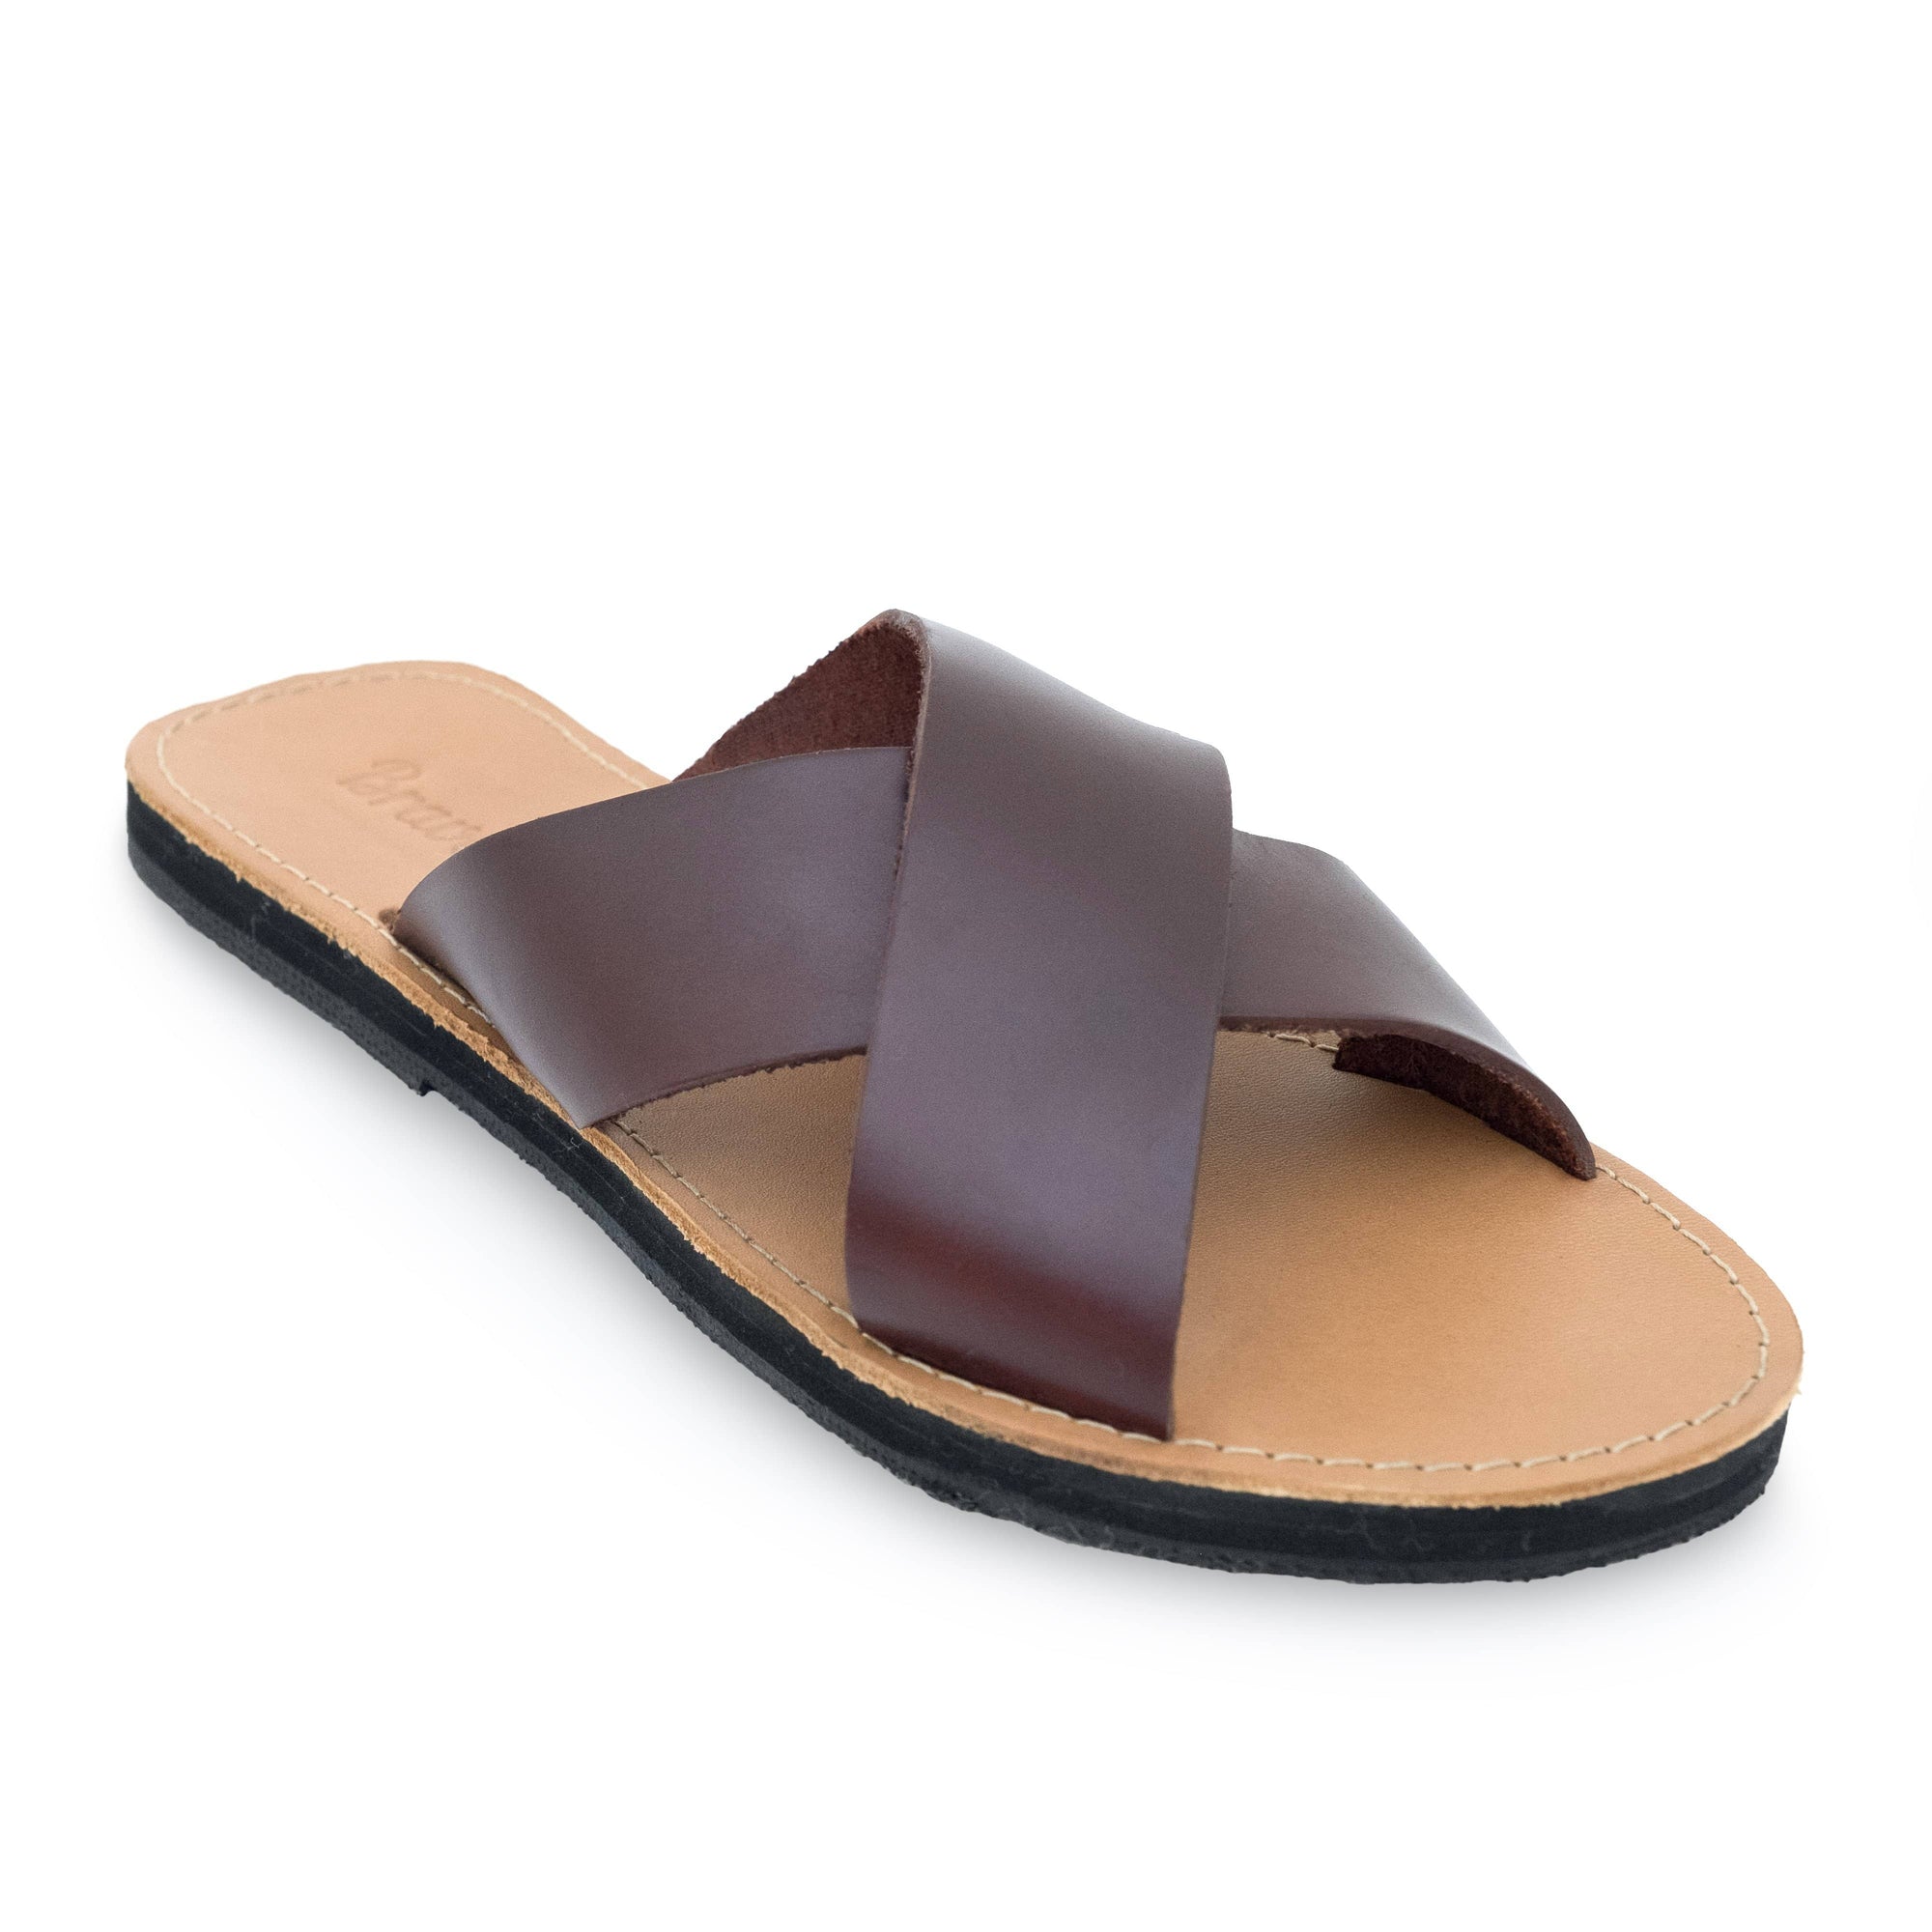 Front side view of the Brave Soles Constanza leather slide sandal that is sustainably made and has upcycled tire soles. Pictured in root beer and natural color.